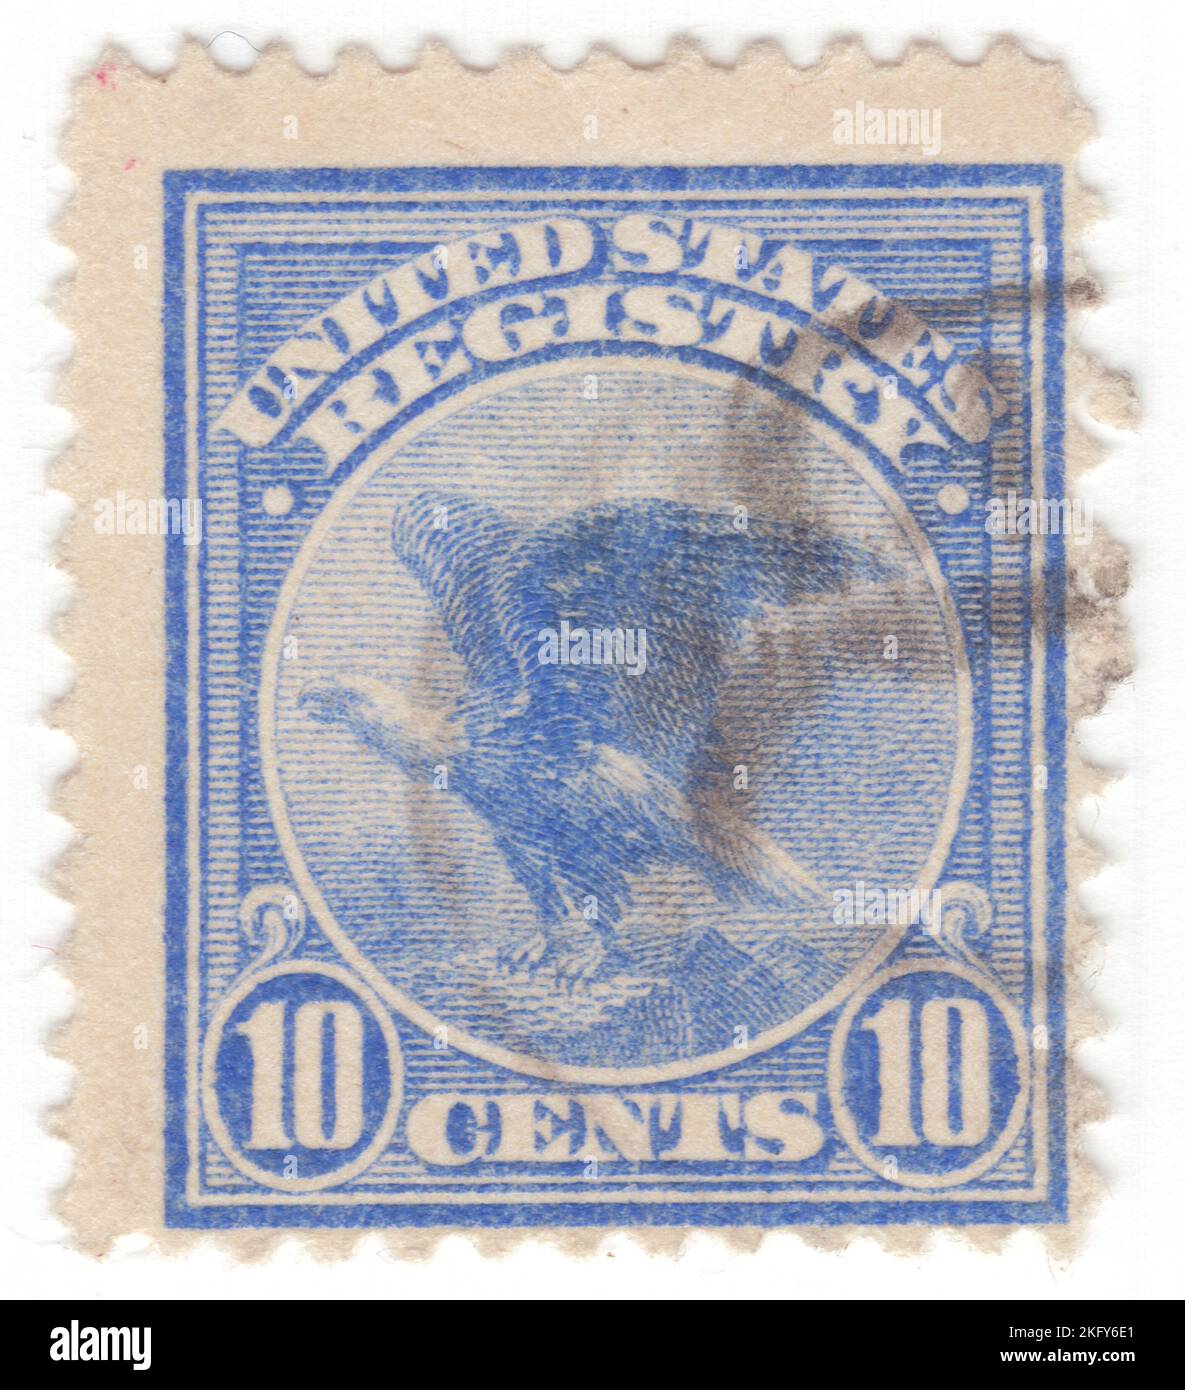 https://c8.alamy.com/comp/2KFY6E1/usa-1911-december-1-an-10-cents-ultramarine-registration-stamp-depicting-american-eagle-us-post-office-issued-americas-first-and-only-registration-stamp-for-the-prepayment-of-registry-fees-this-new-stamp-could-only-be-used-to-pay-the-registry-fee-and-was-not-valid-for-regular-postage-when-used-in-addition-to-regular-postage-this-stamp-provided-special-care-and-handling-for-an-extra-fee-for-a-letter-or-package-upon-receiving-the-item-the-addressee-was-required-to-sign-a-receipt-2KFY6E1.jpg